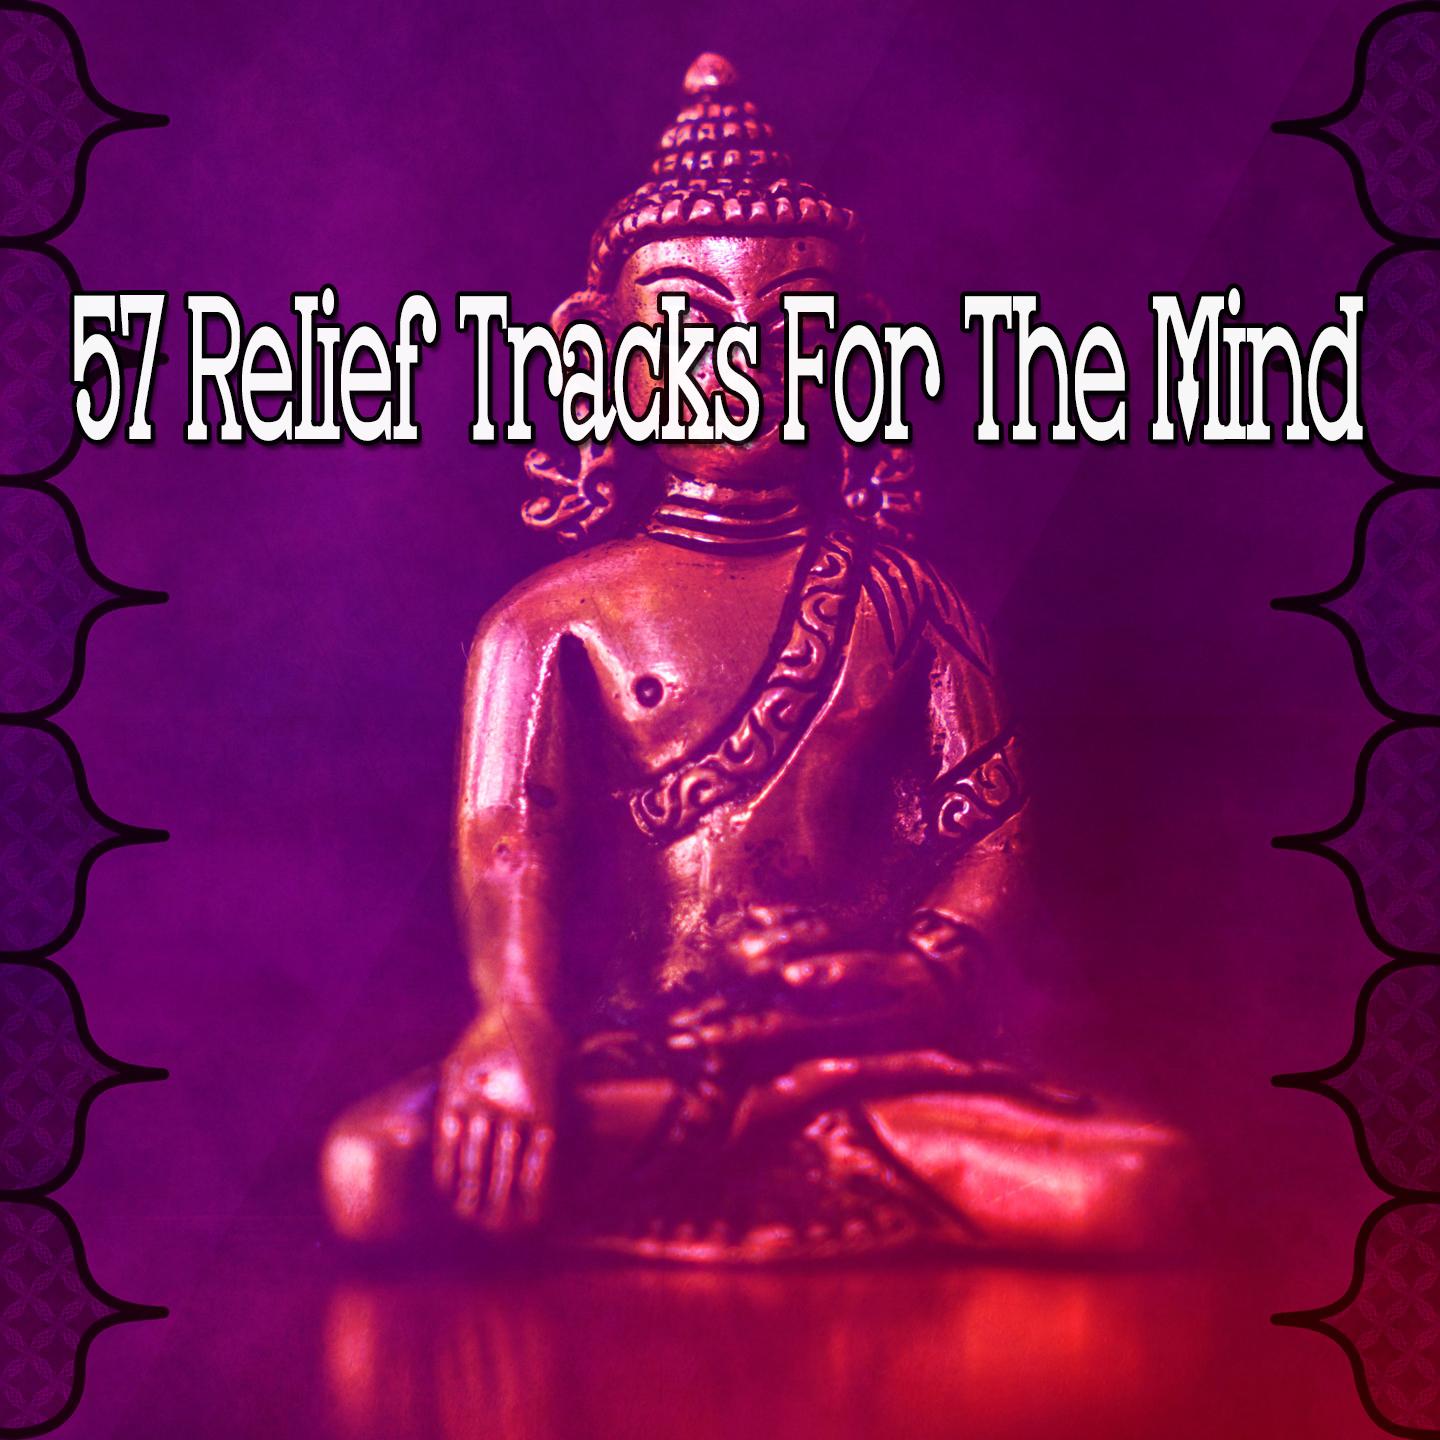 57 Relief Tracks for the Mind